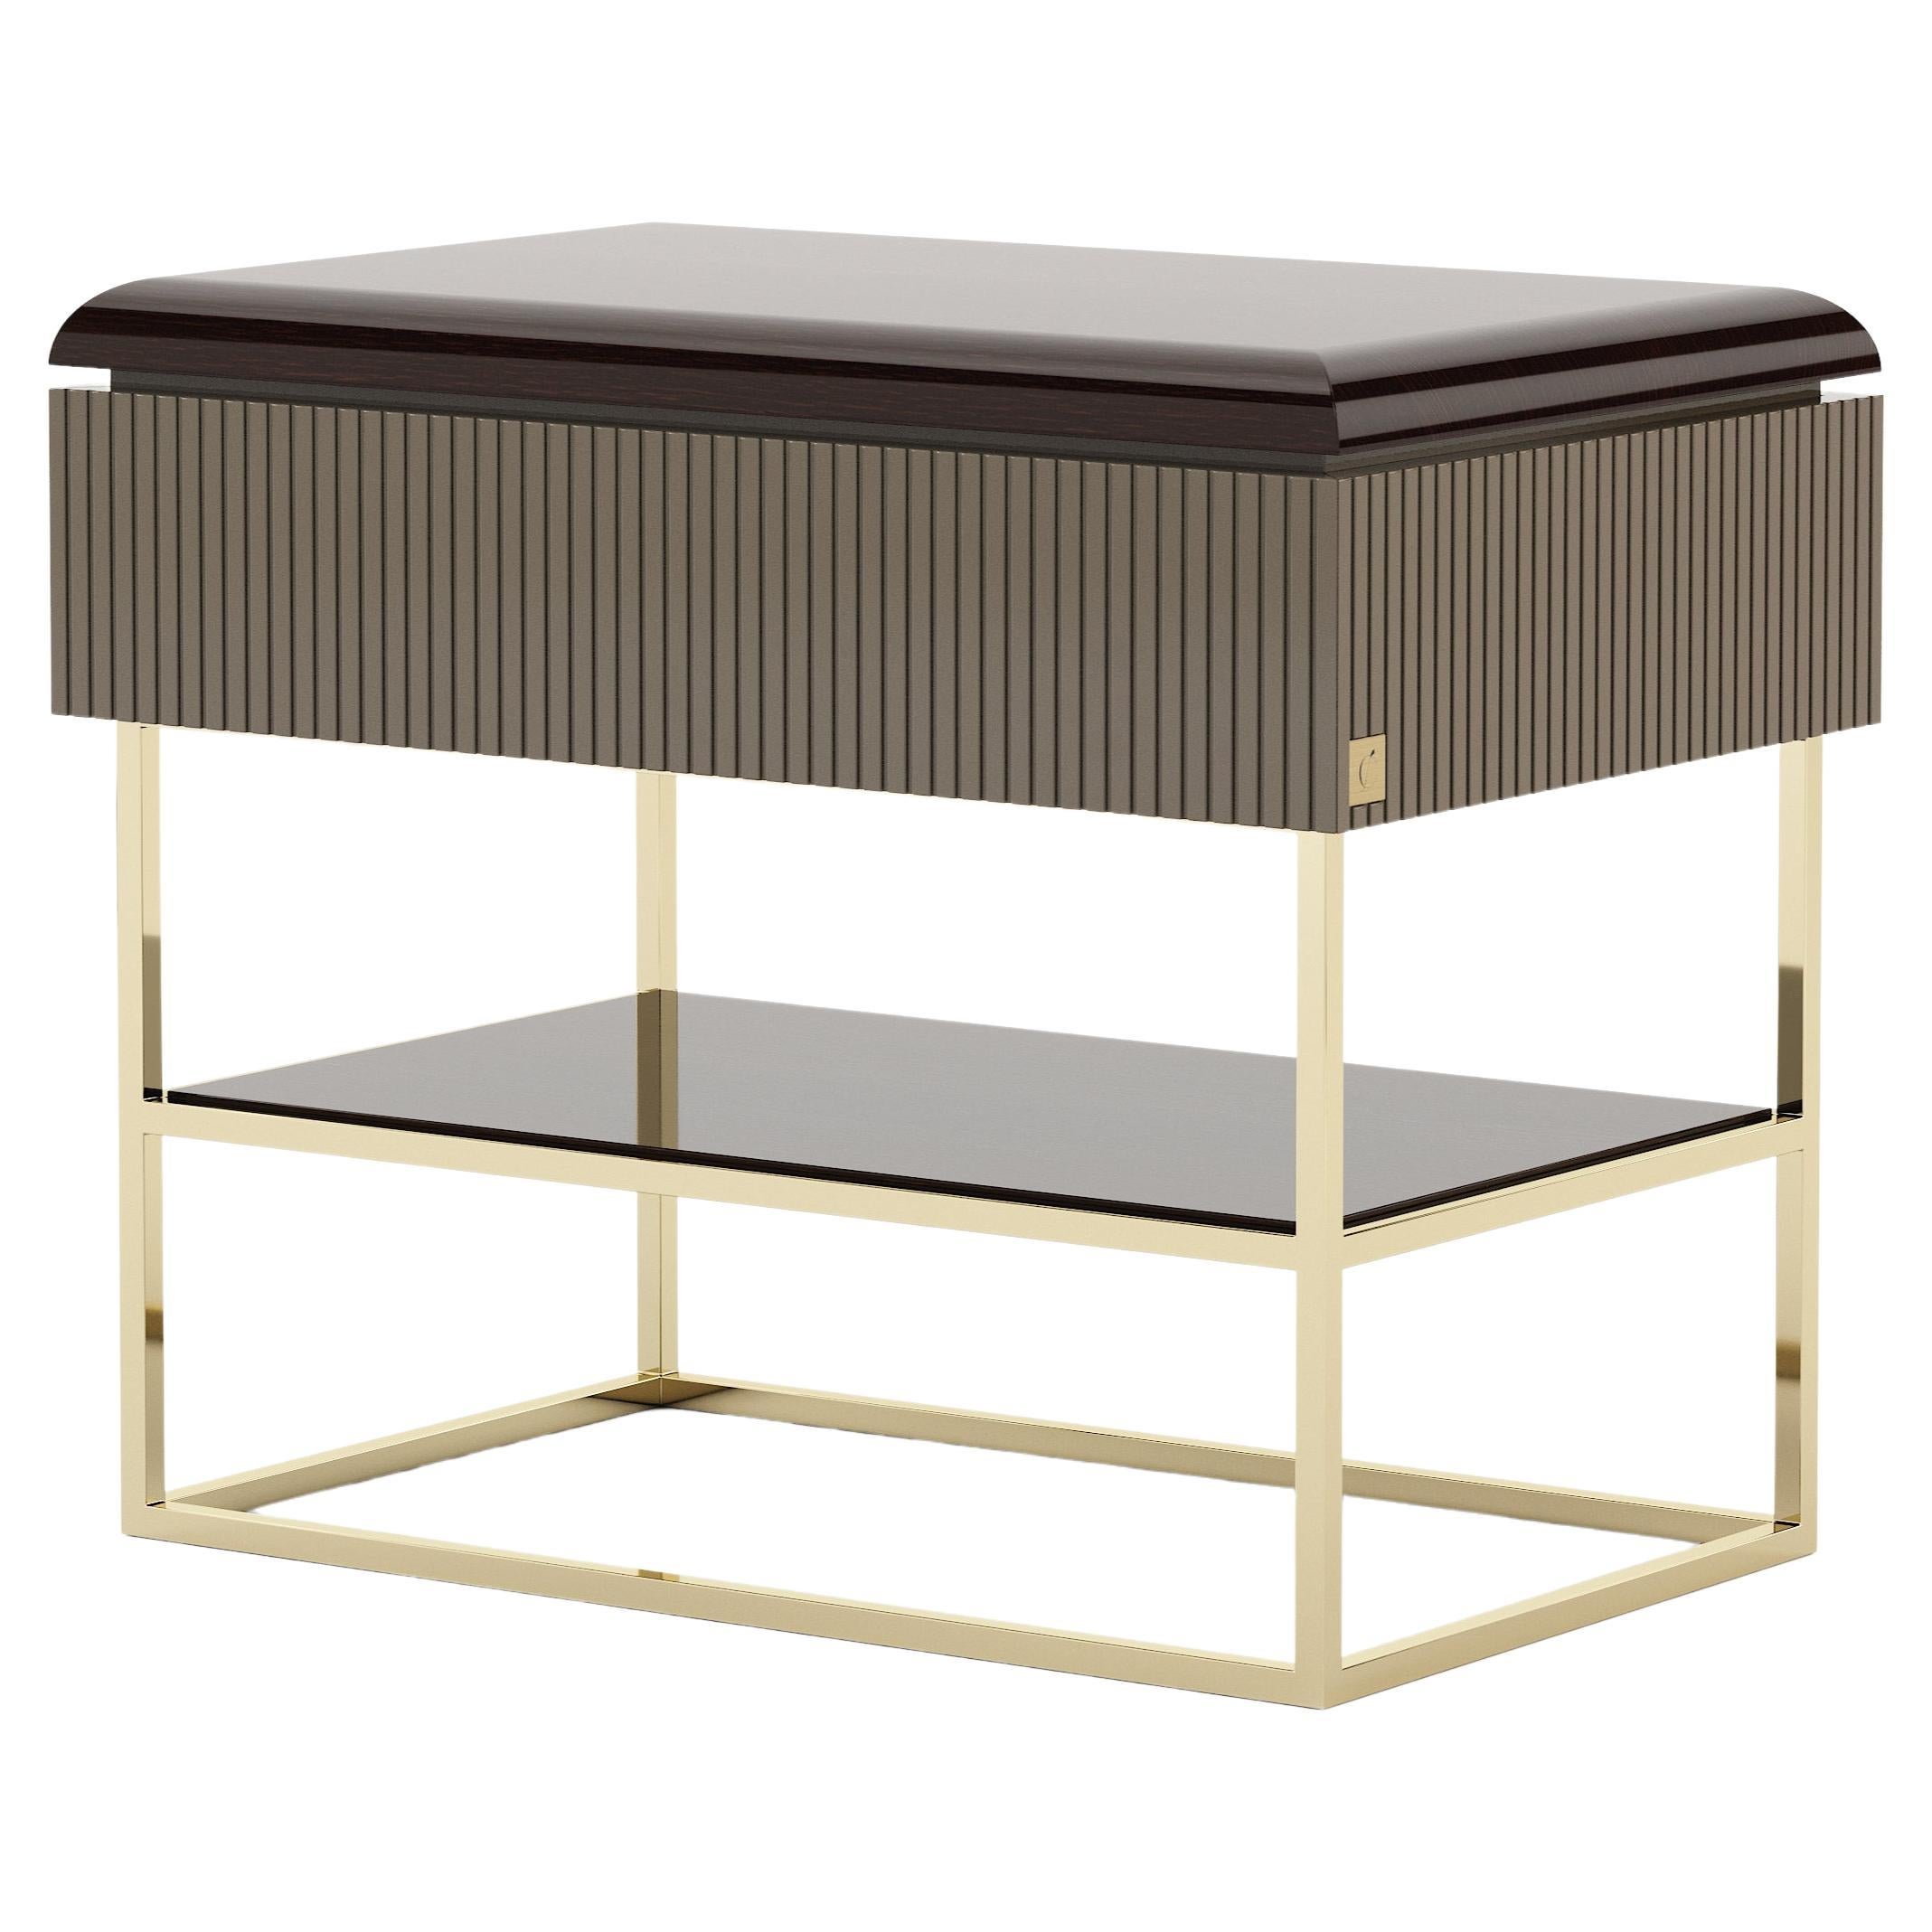 Art Deco Style Her Night Table Made with Oak, Lacquer and Brass by Stylish Club